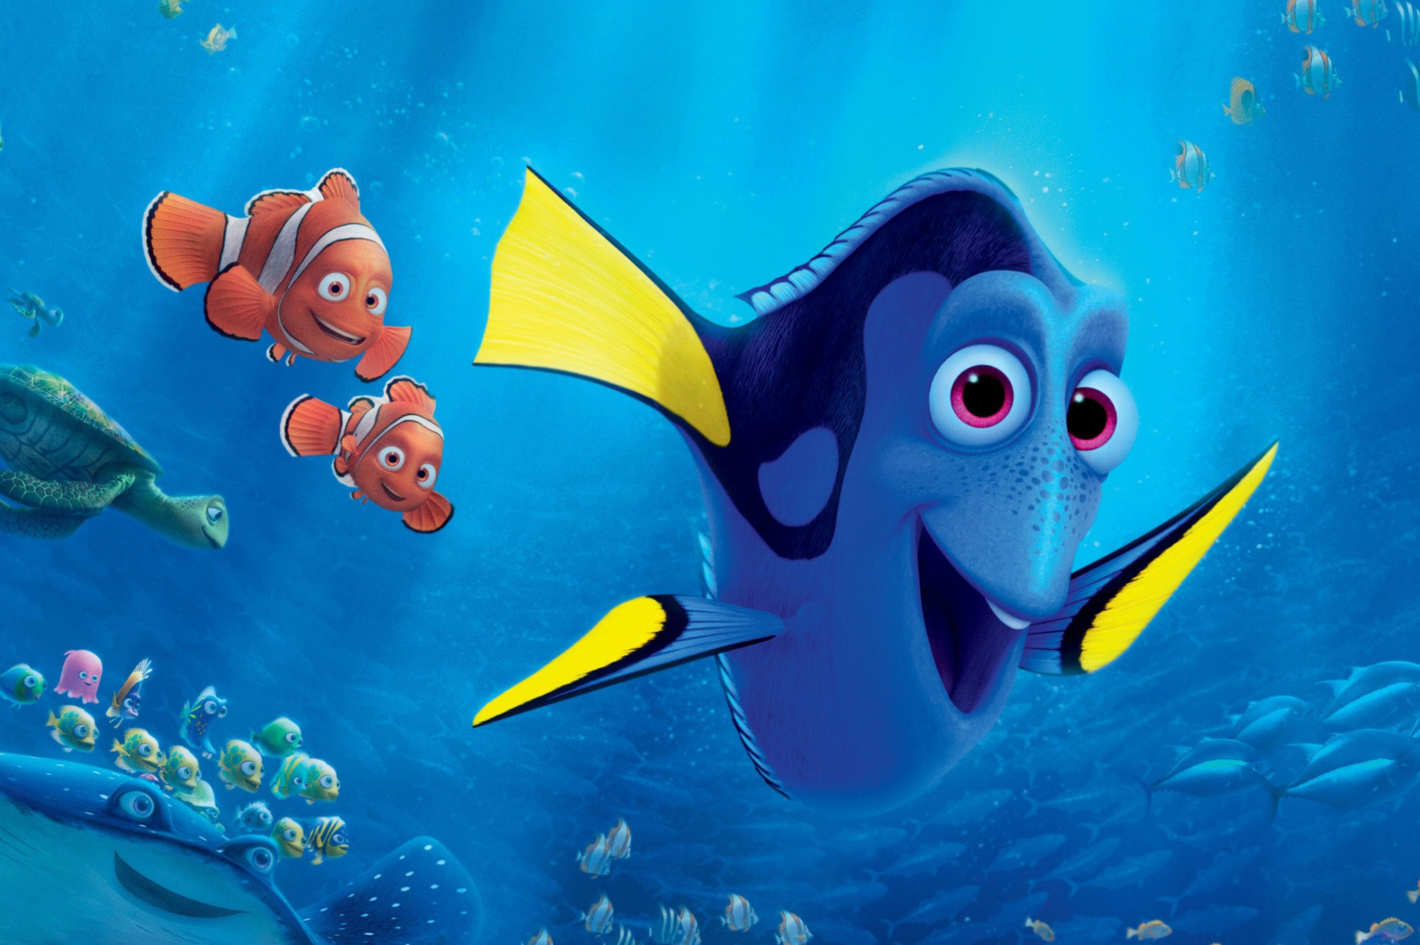 Why Are Finding Nemo And Finding Dory Such Enormous Hits